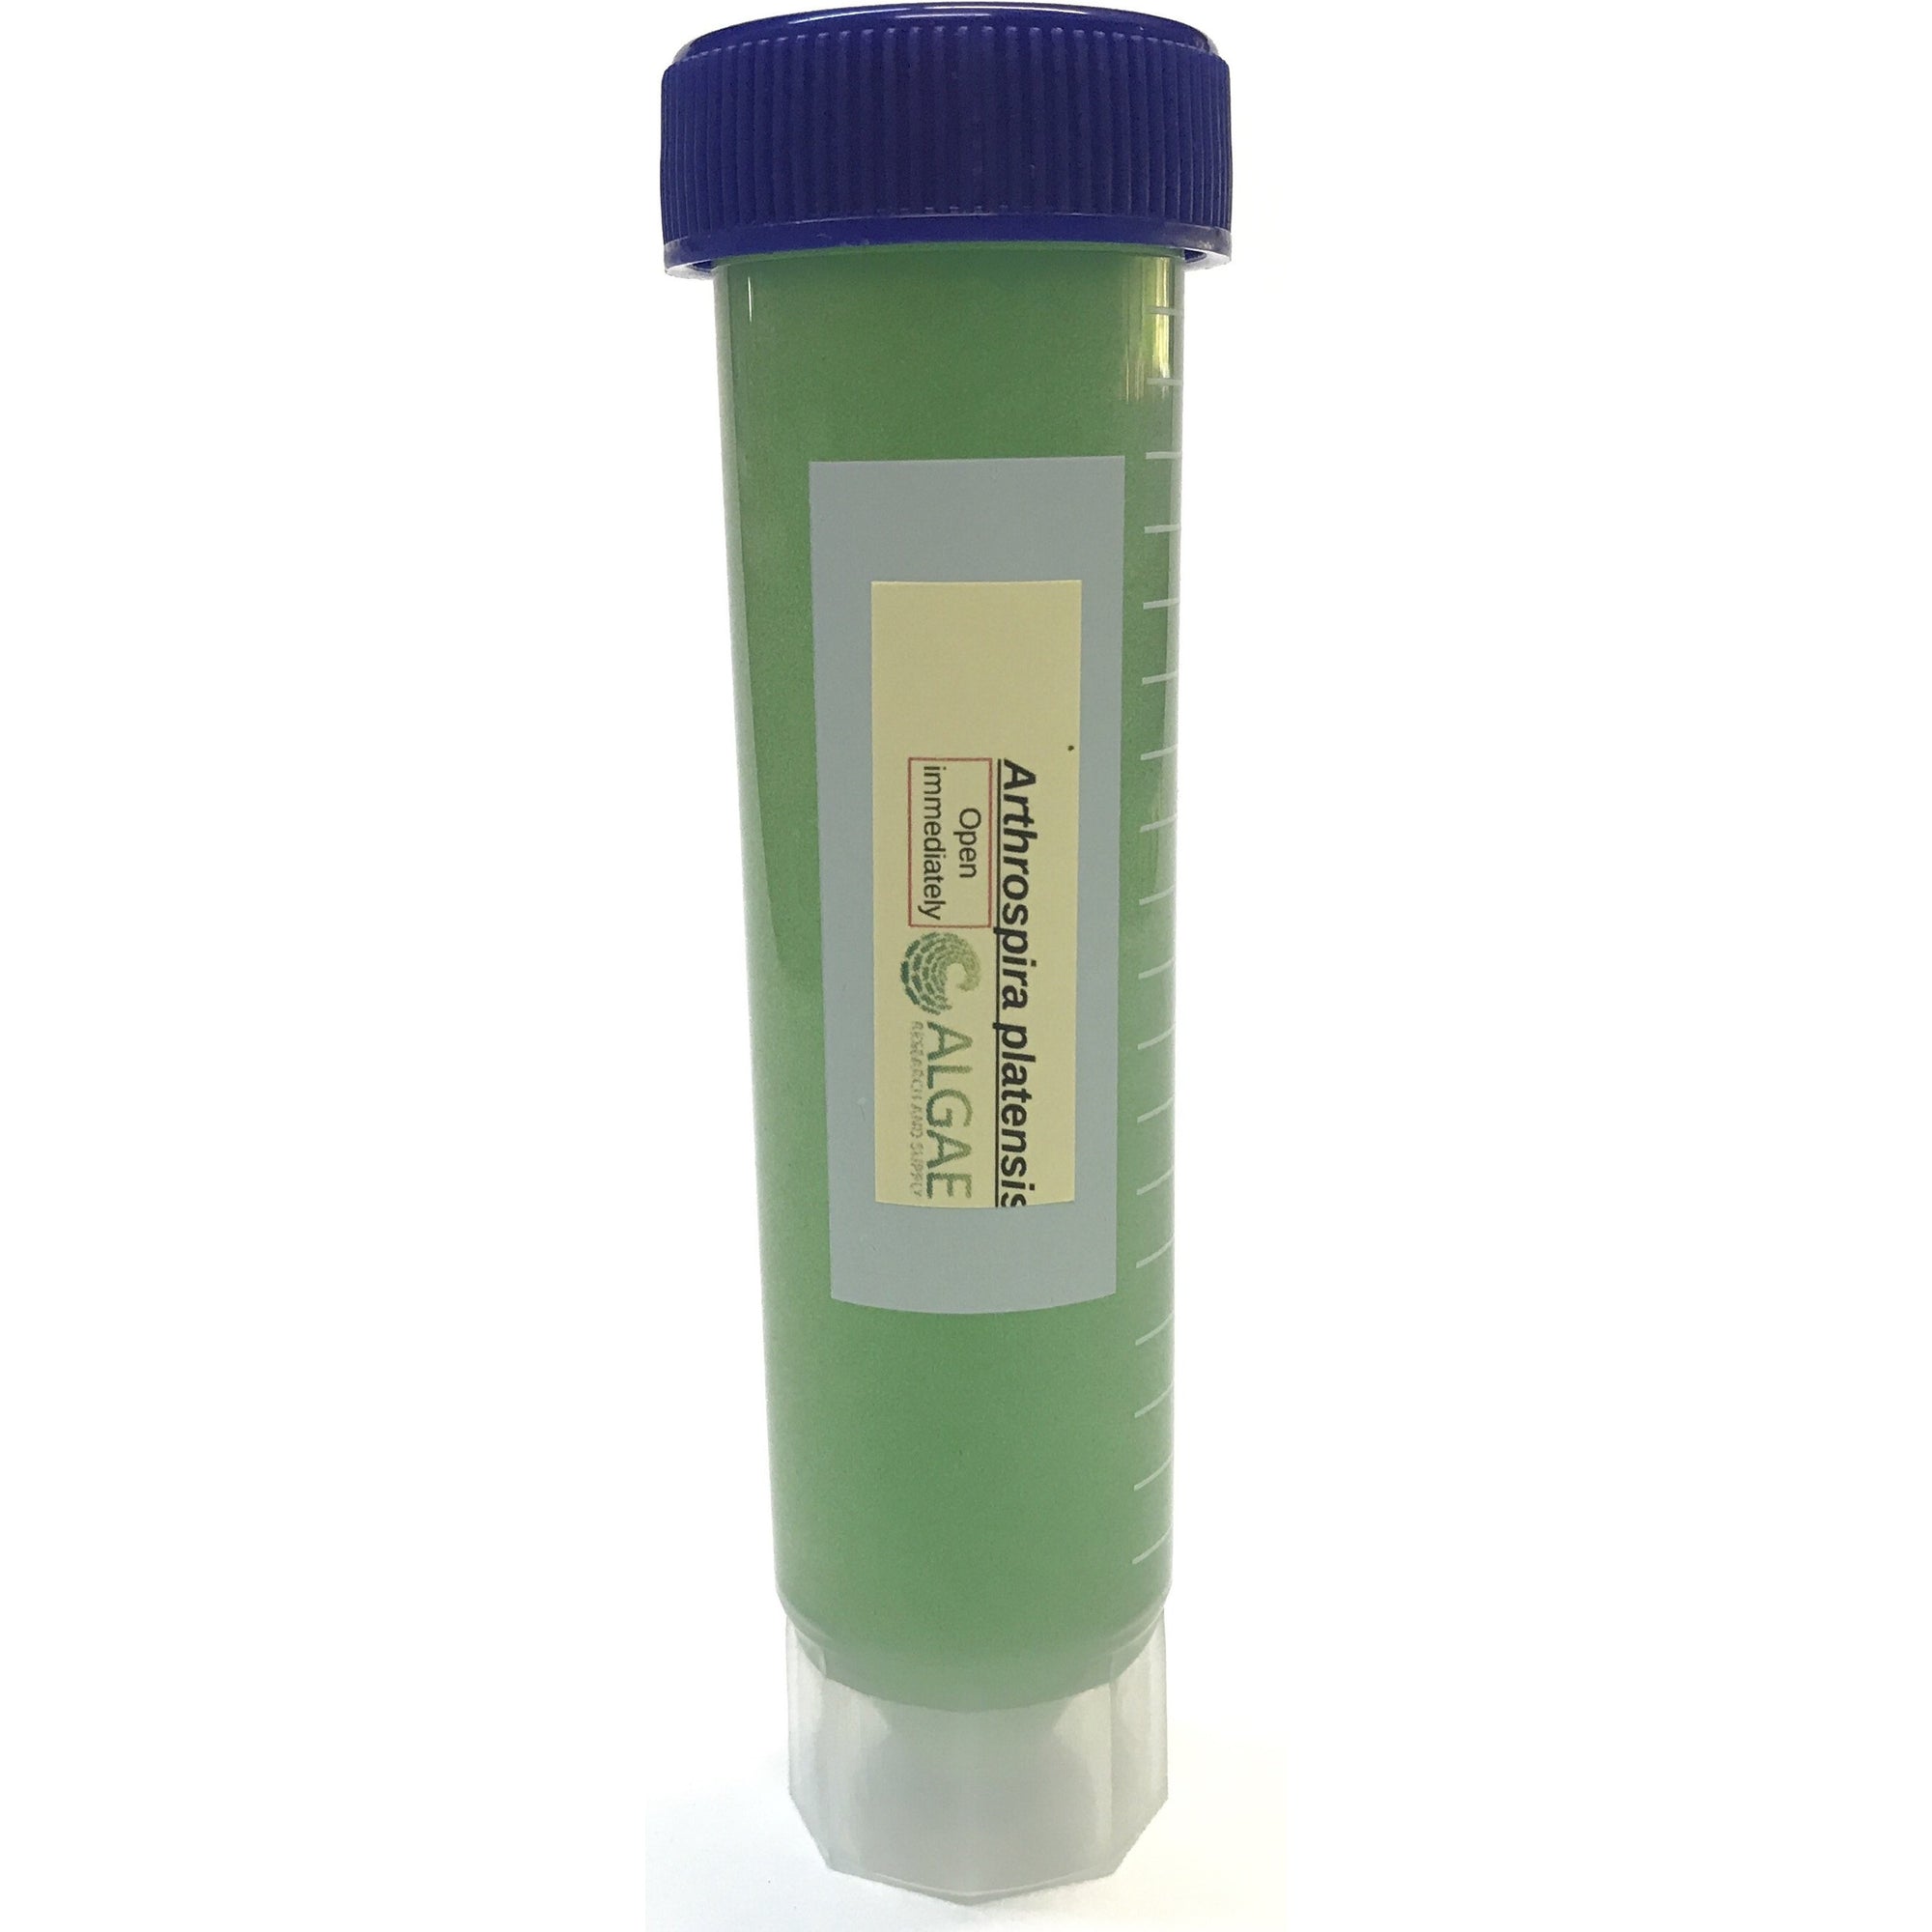 This is a 50ml centrifuge tube filled with algae culture, spirulina. 